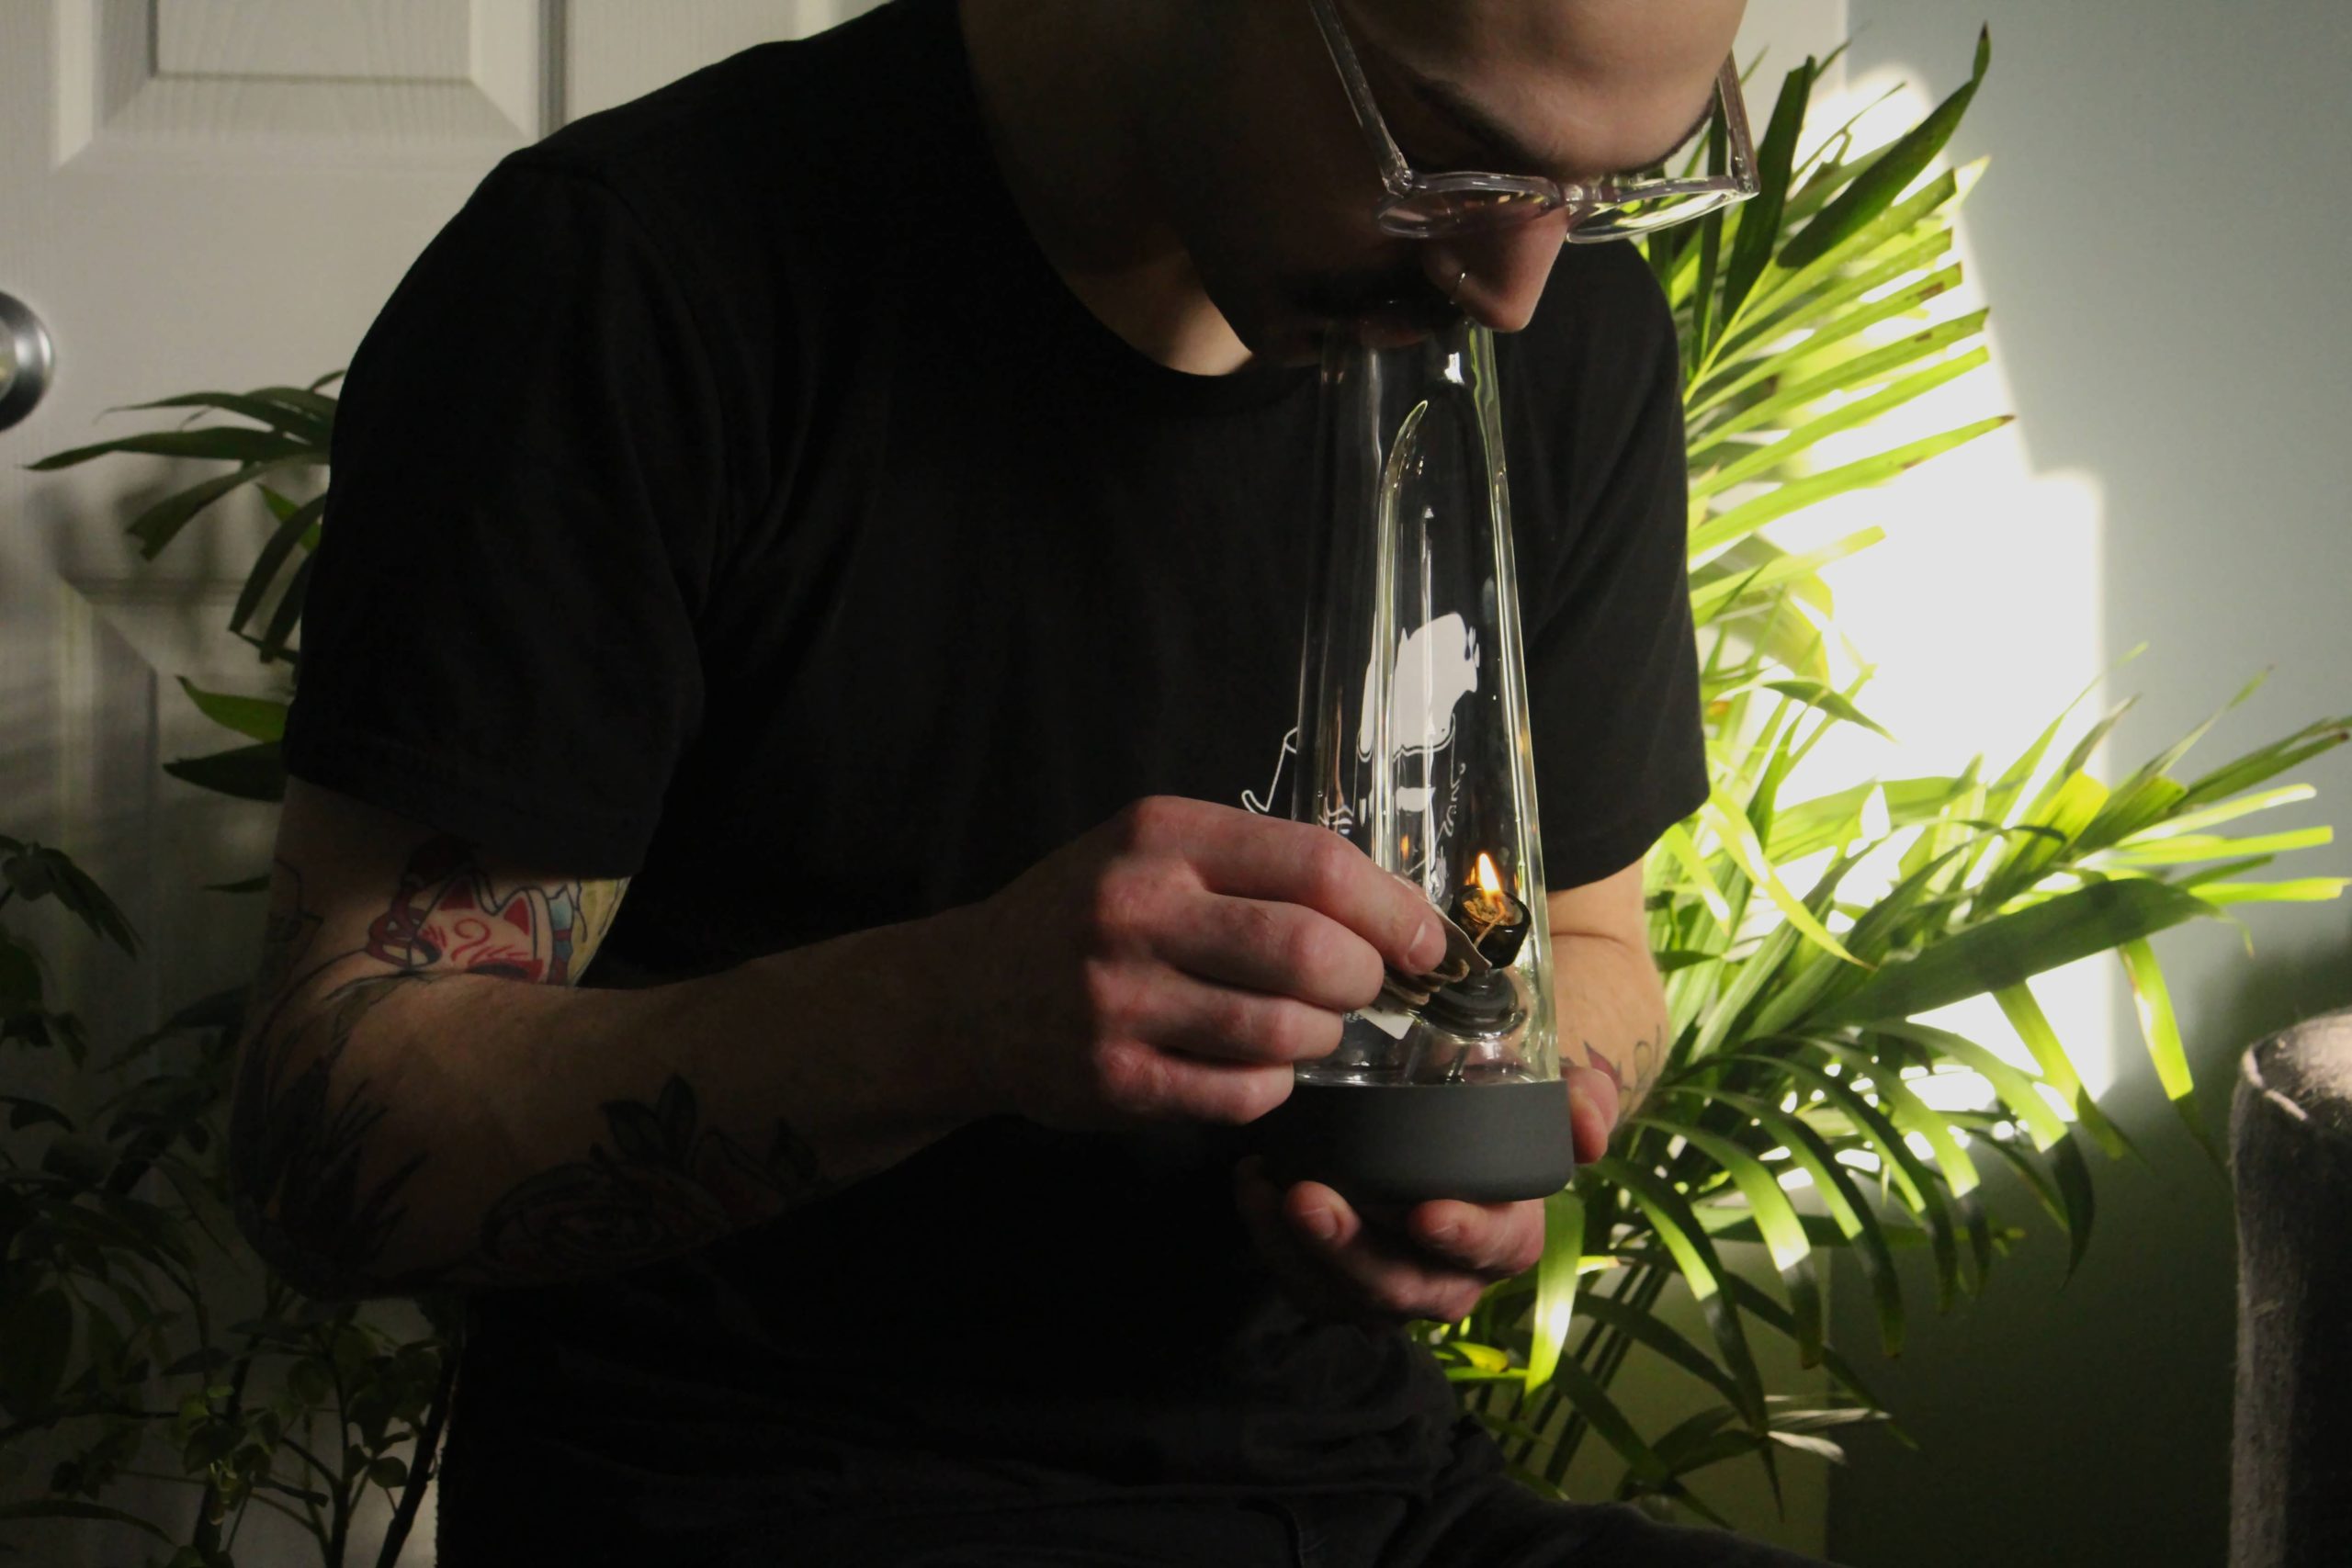 A person smoking hash from a bong